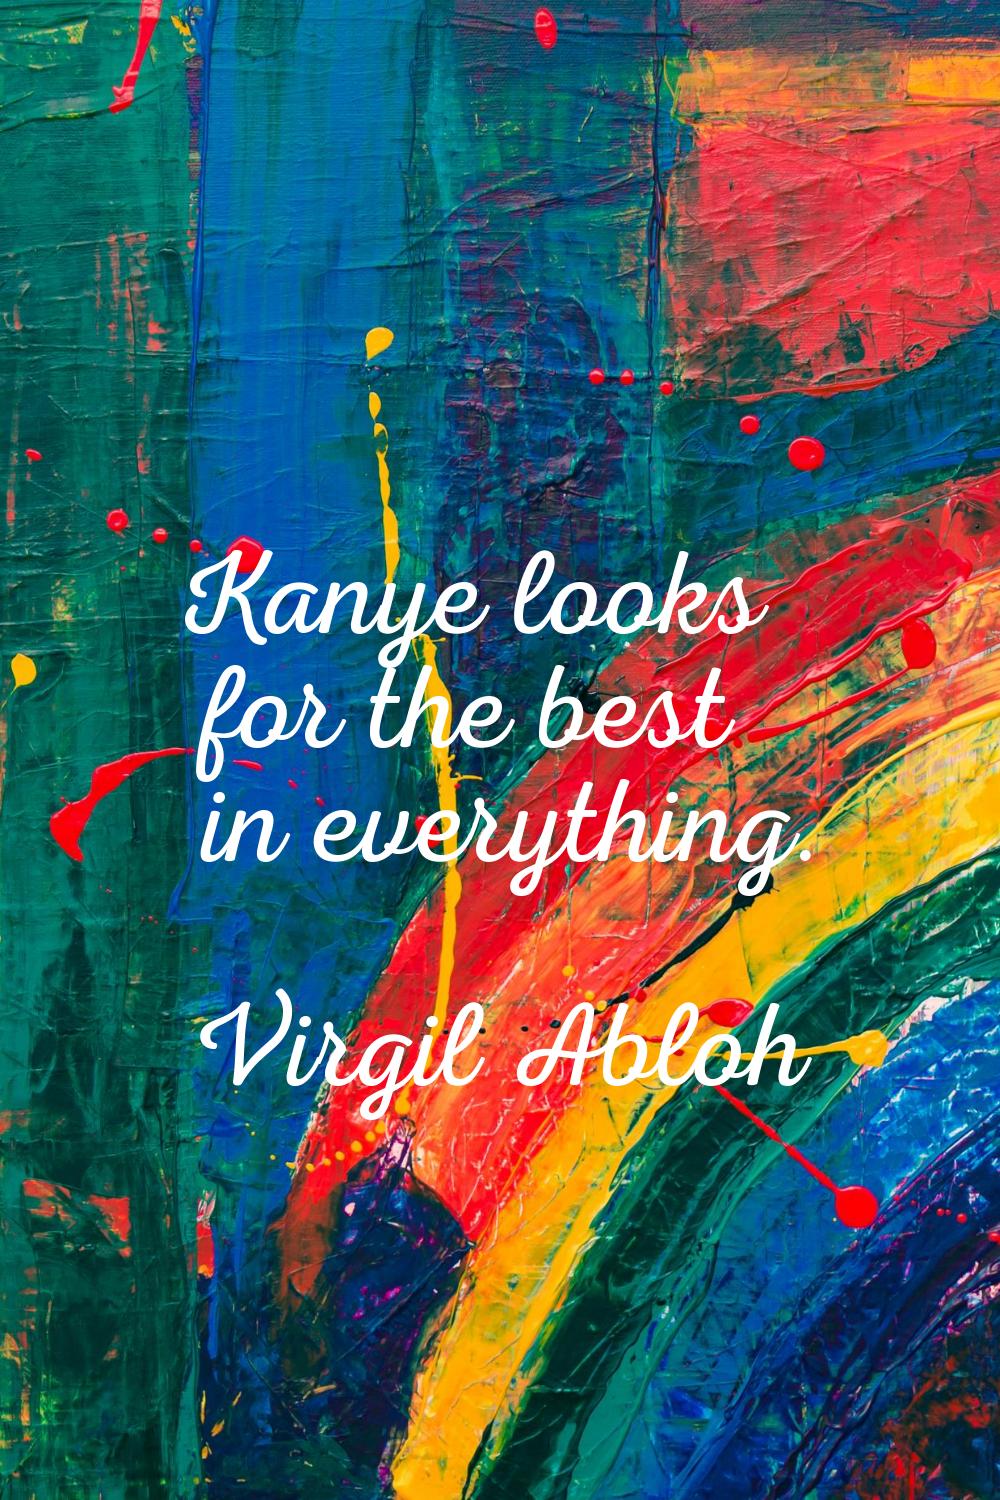 Kanye looks for the best in everything.